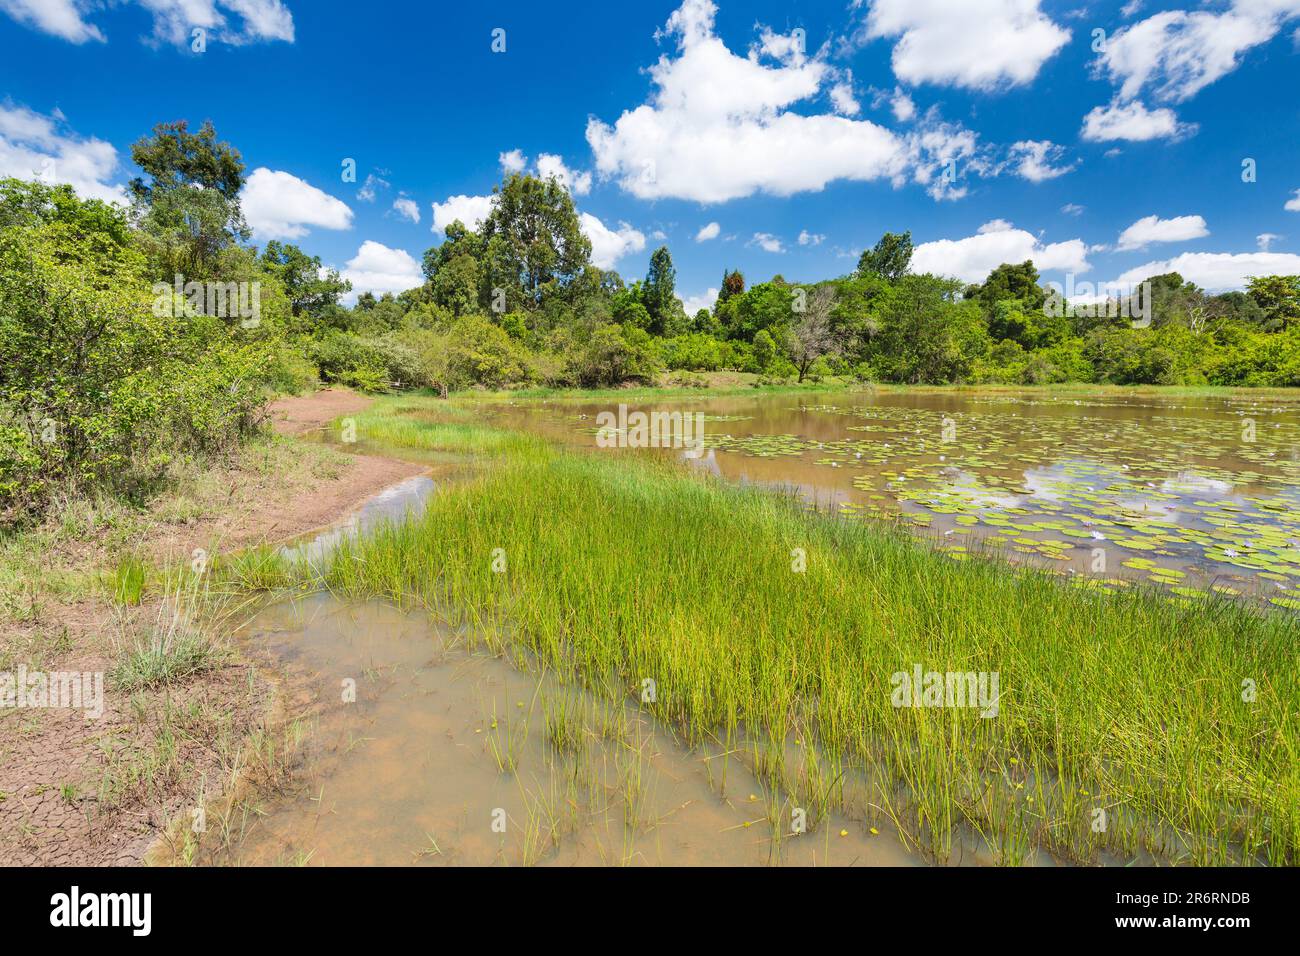 The beautiful Lily Lake in Karura Forest with its many beautiful water lilies, Nairobi, Kenya with blue sky. Stock Photo